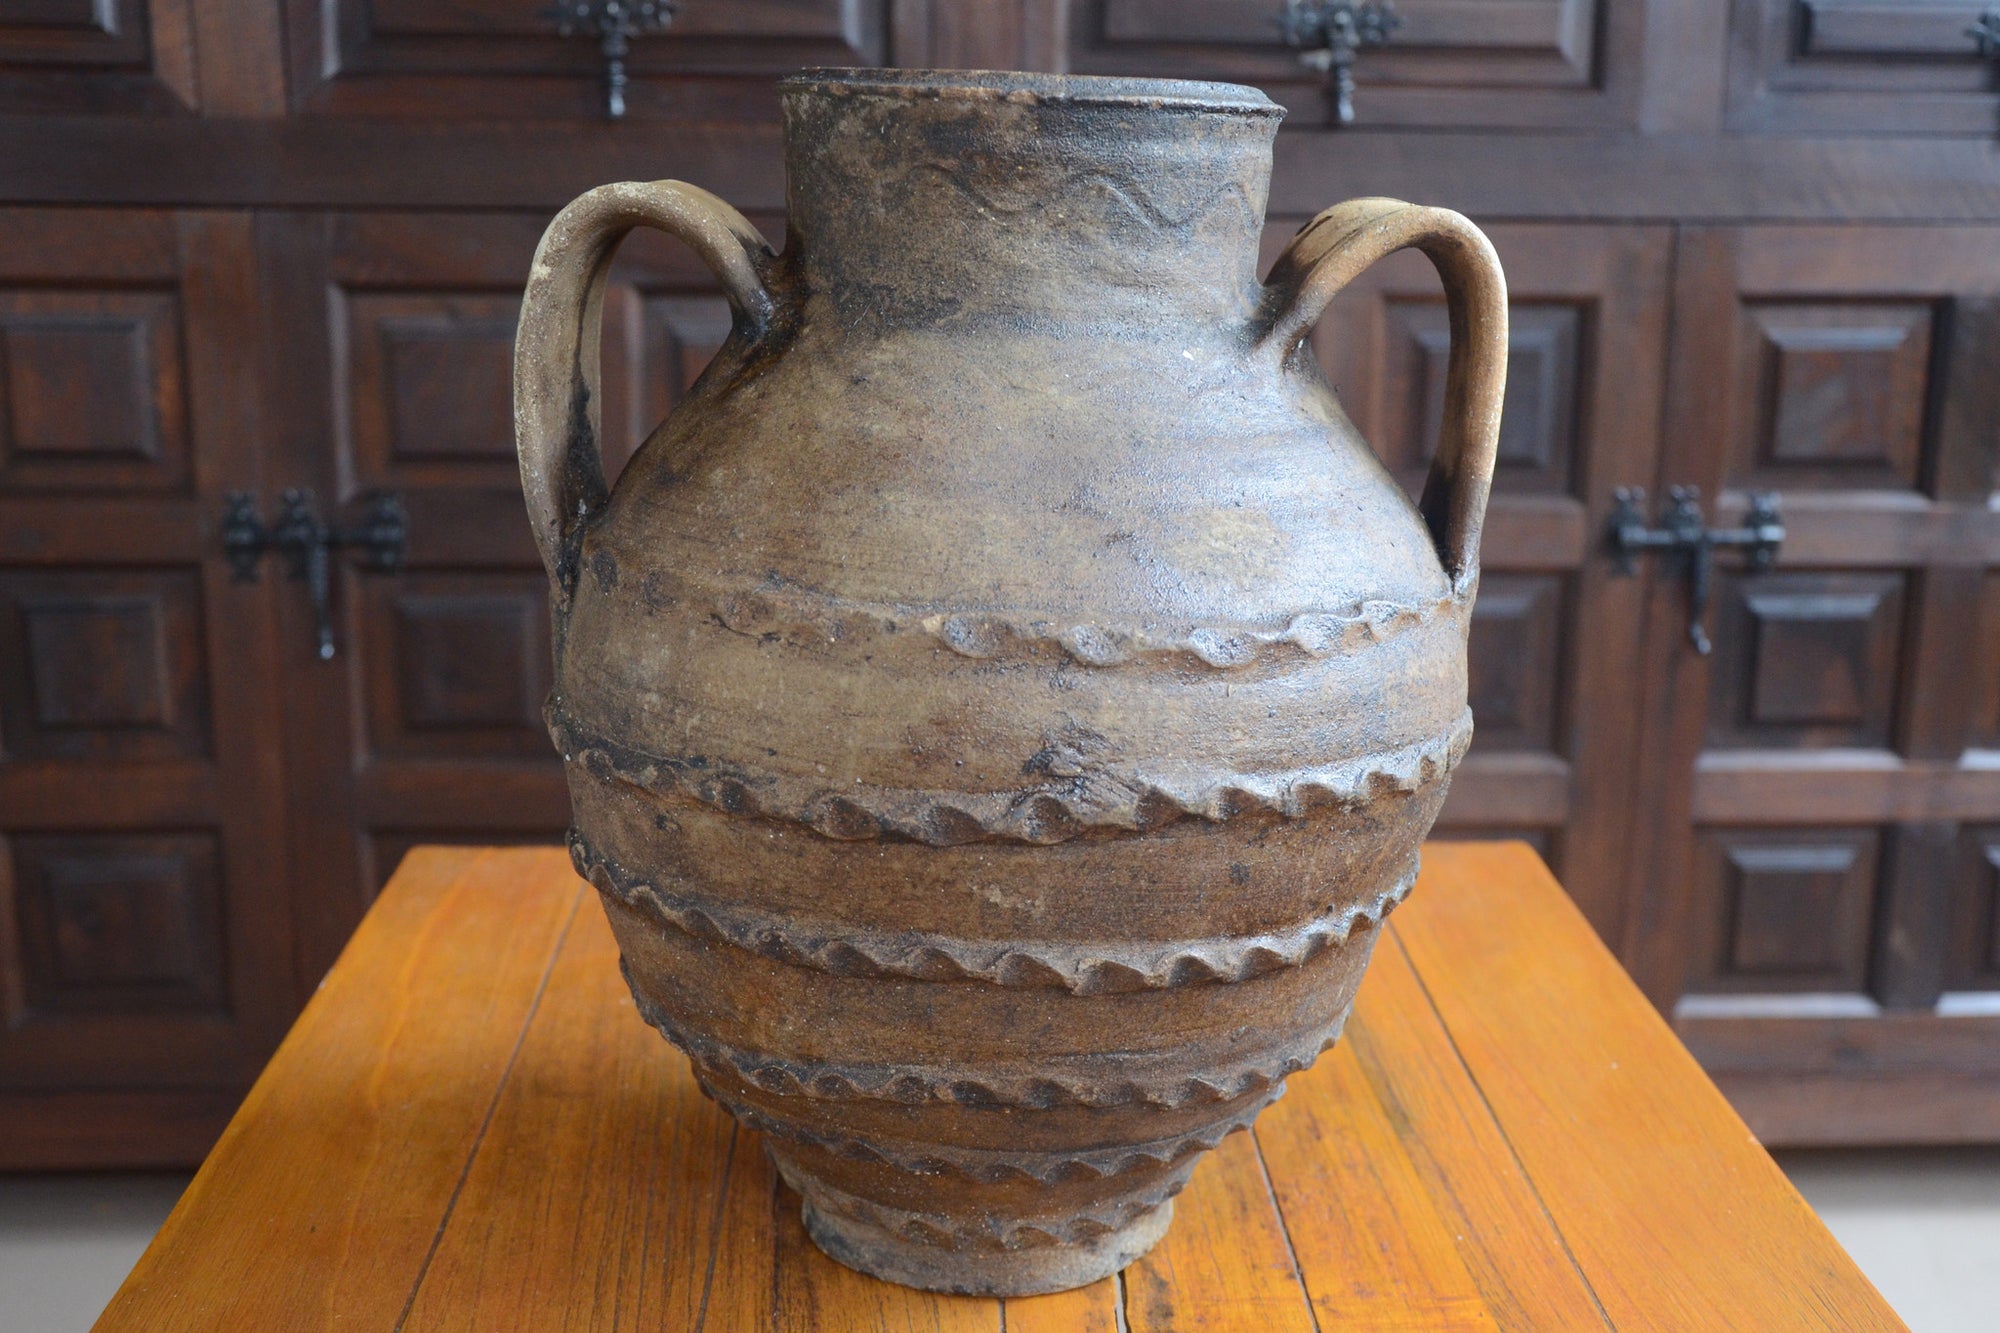 Olla from Moveros, Spain (used, vintage)